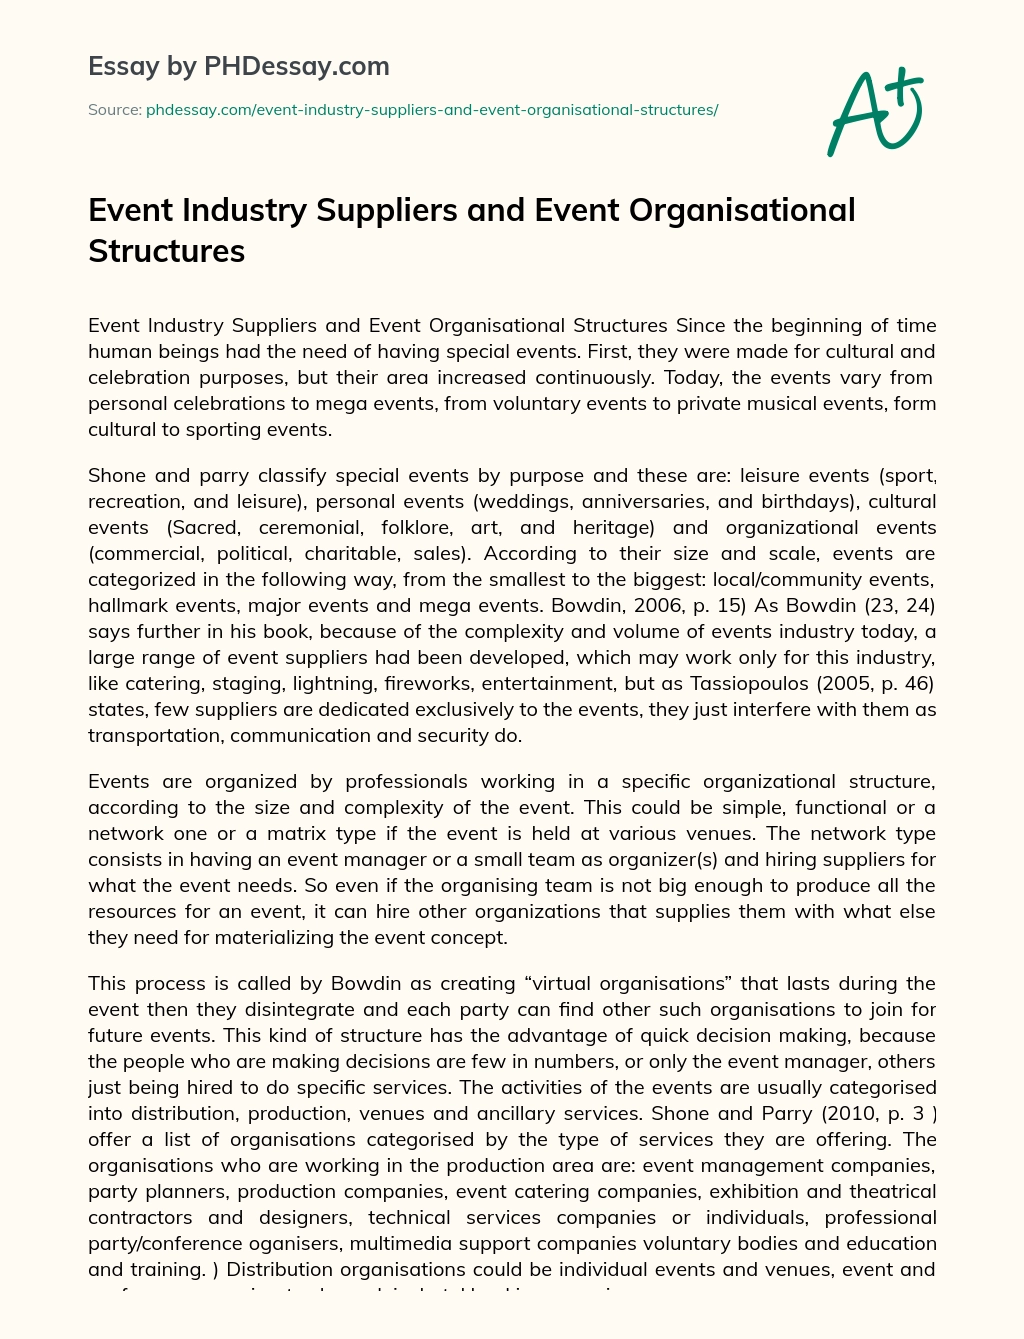 Event Industry Suppliers and Event Organisational Structures essay